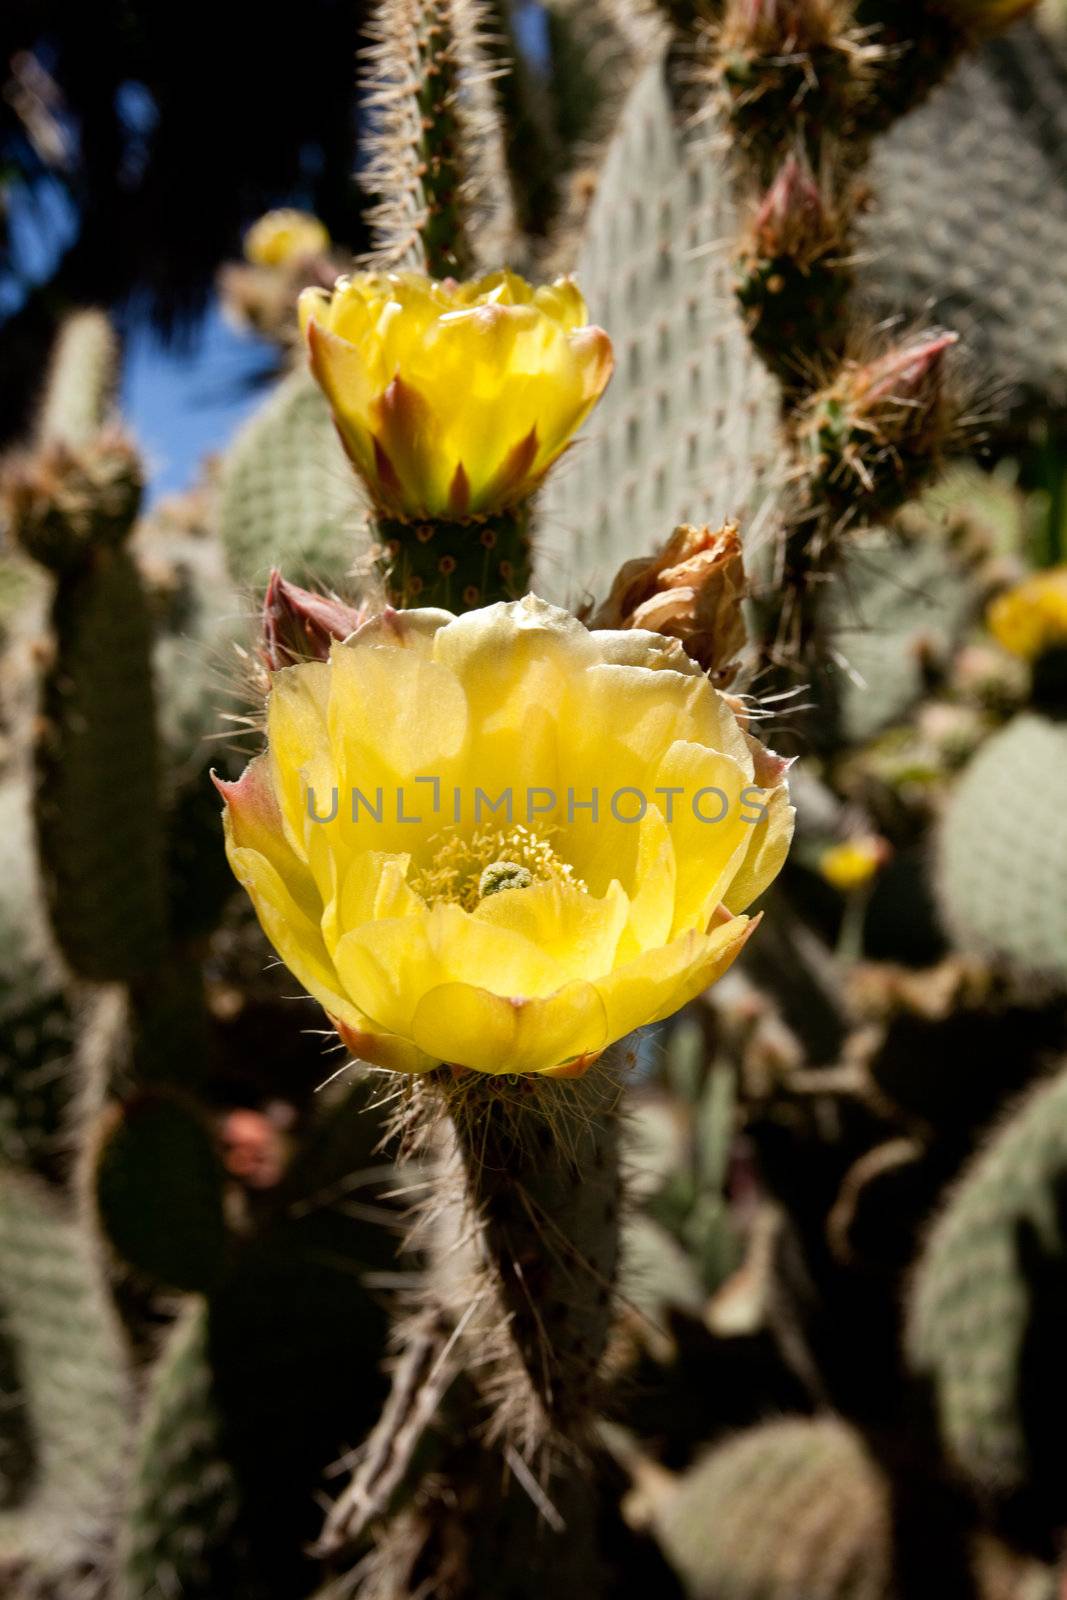 Prickly pear cactus blossoms by steheap